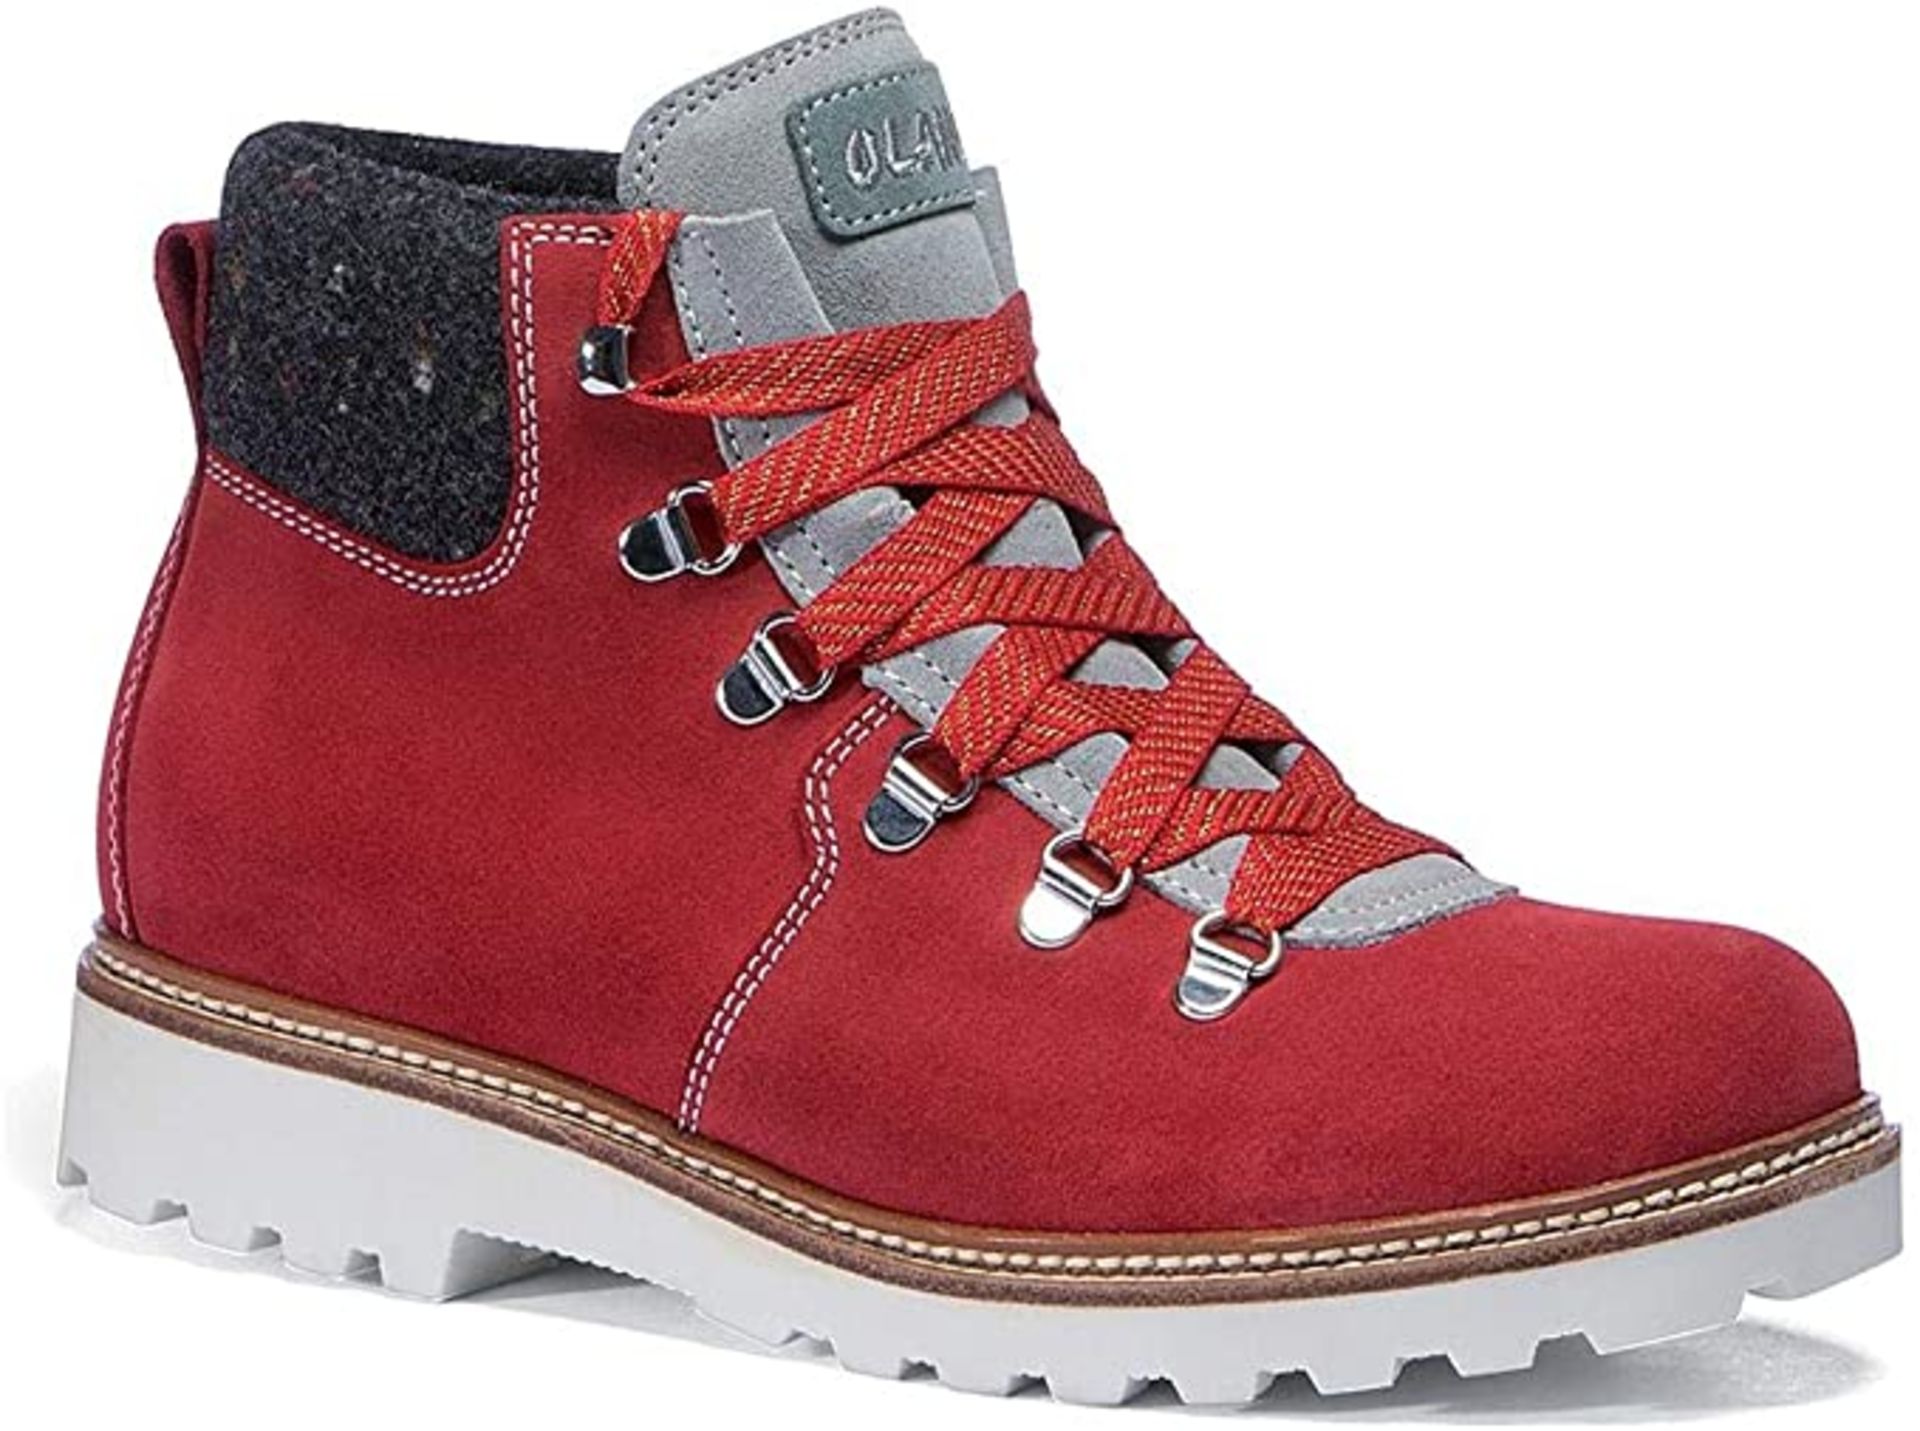 1 x Pair of Designer Olang Merano BTX 815 Rosso Women's Winter Boots - Euro Size 41 - Brand New - Image 3 of 4